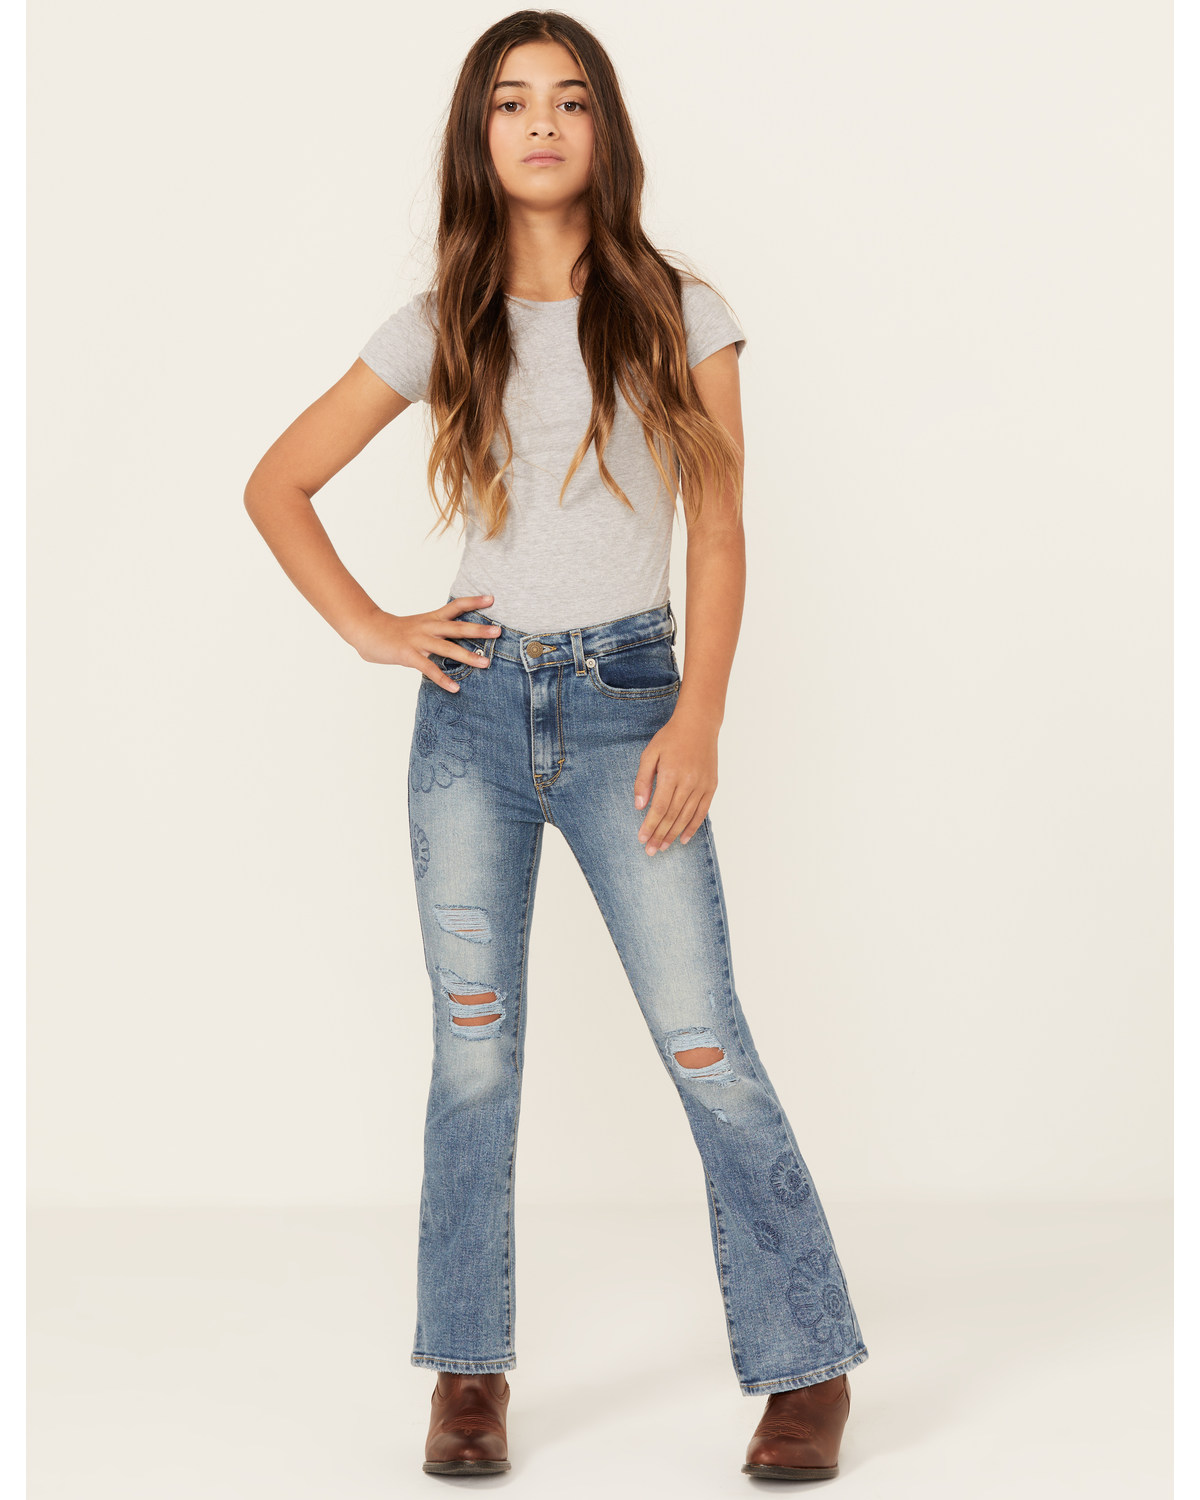 Levi's Girls' 726 Medium Wash Embroidered Stretch Flare Jeans